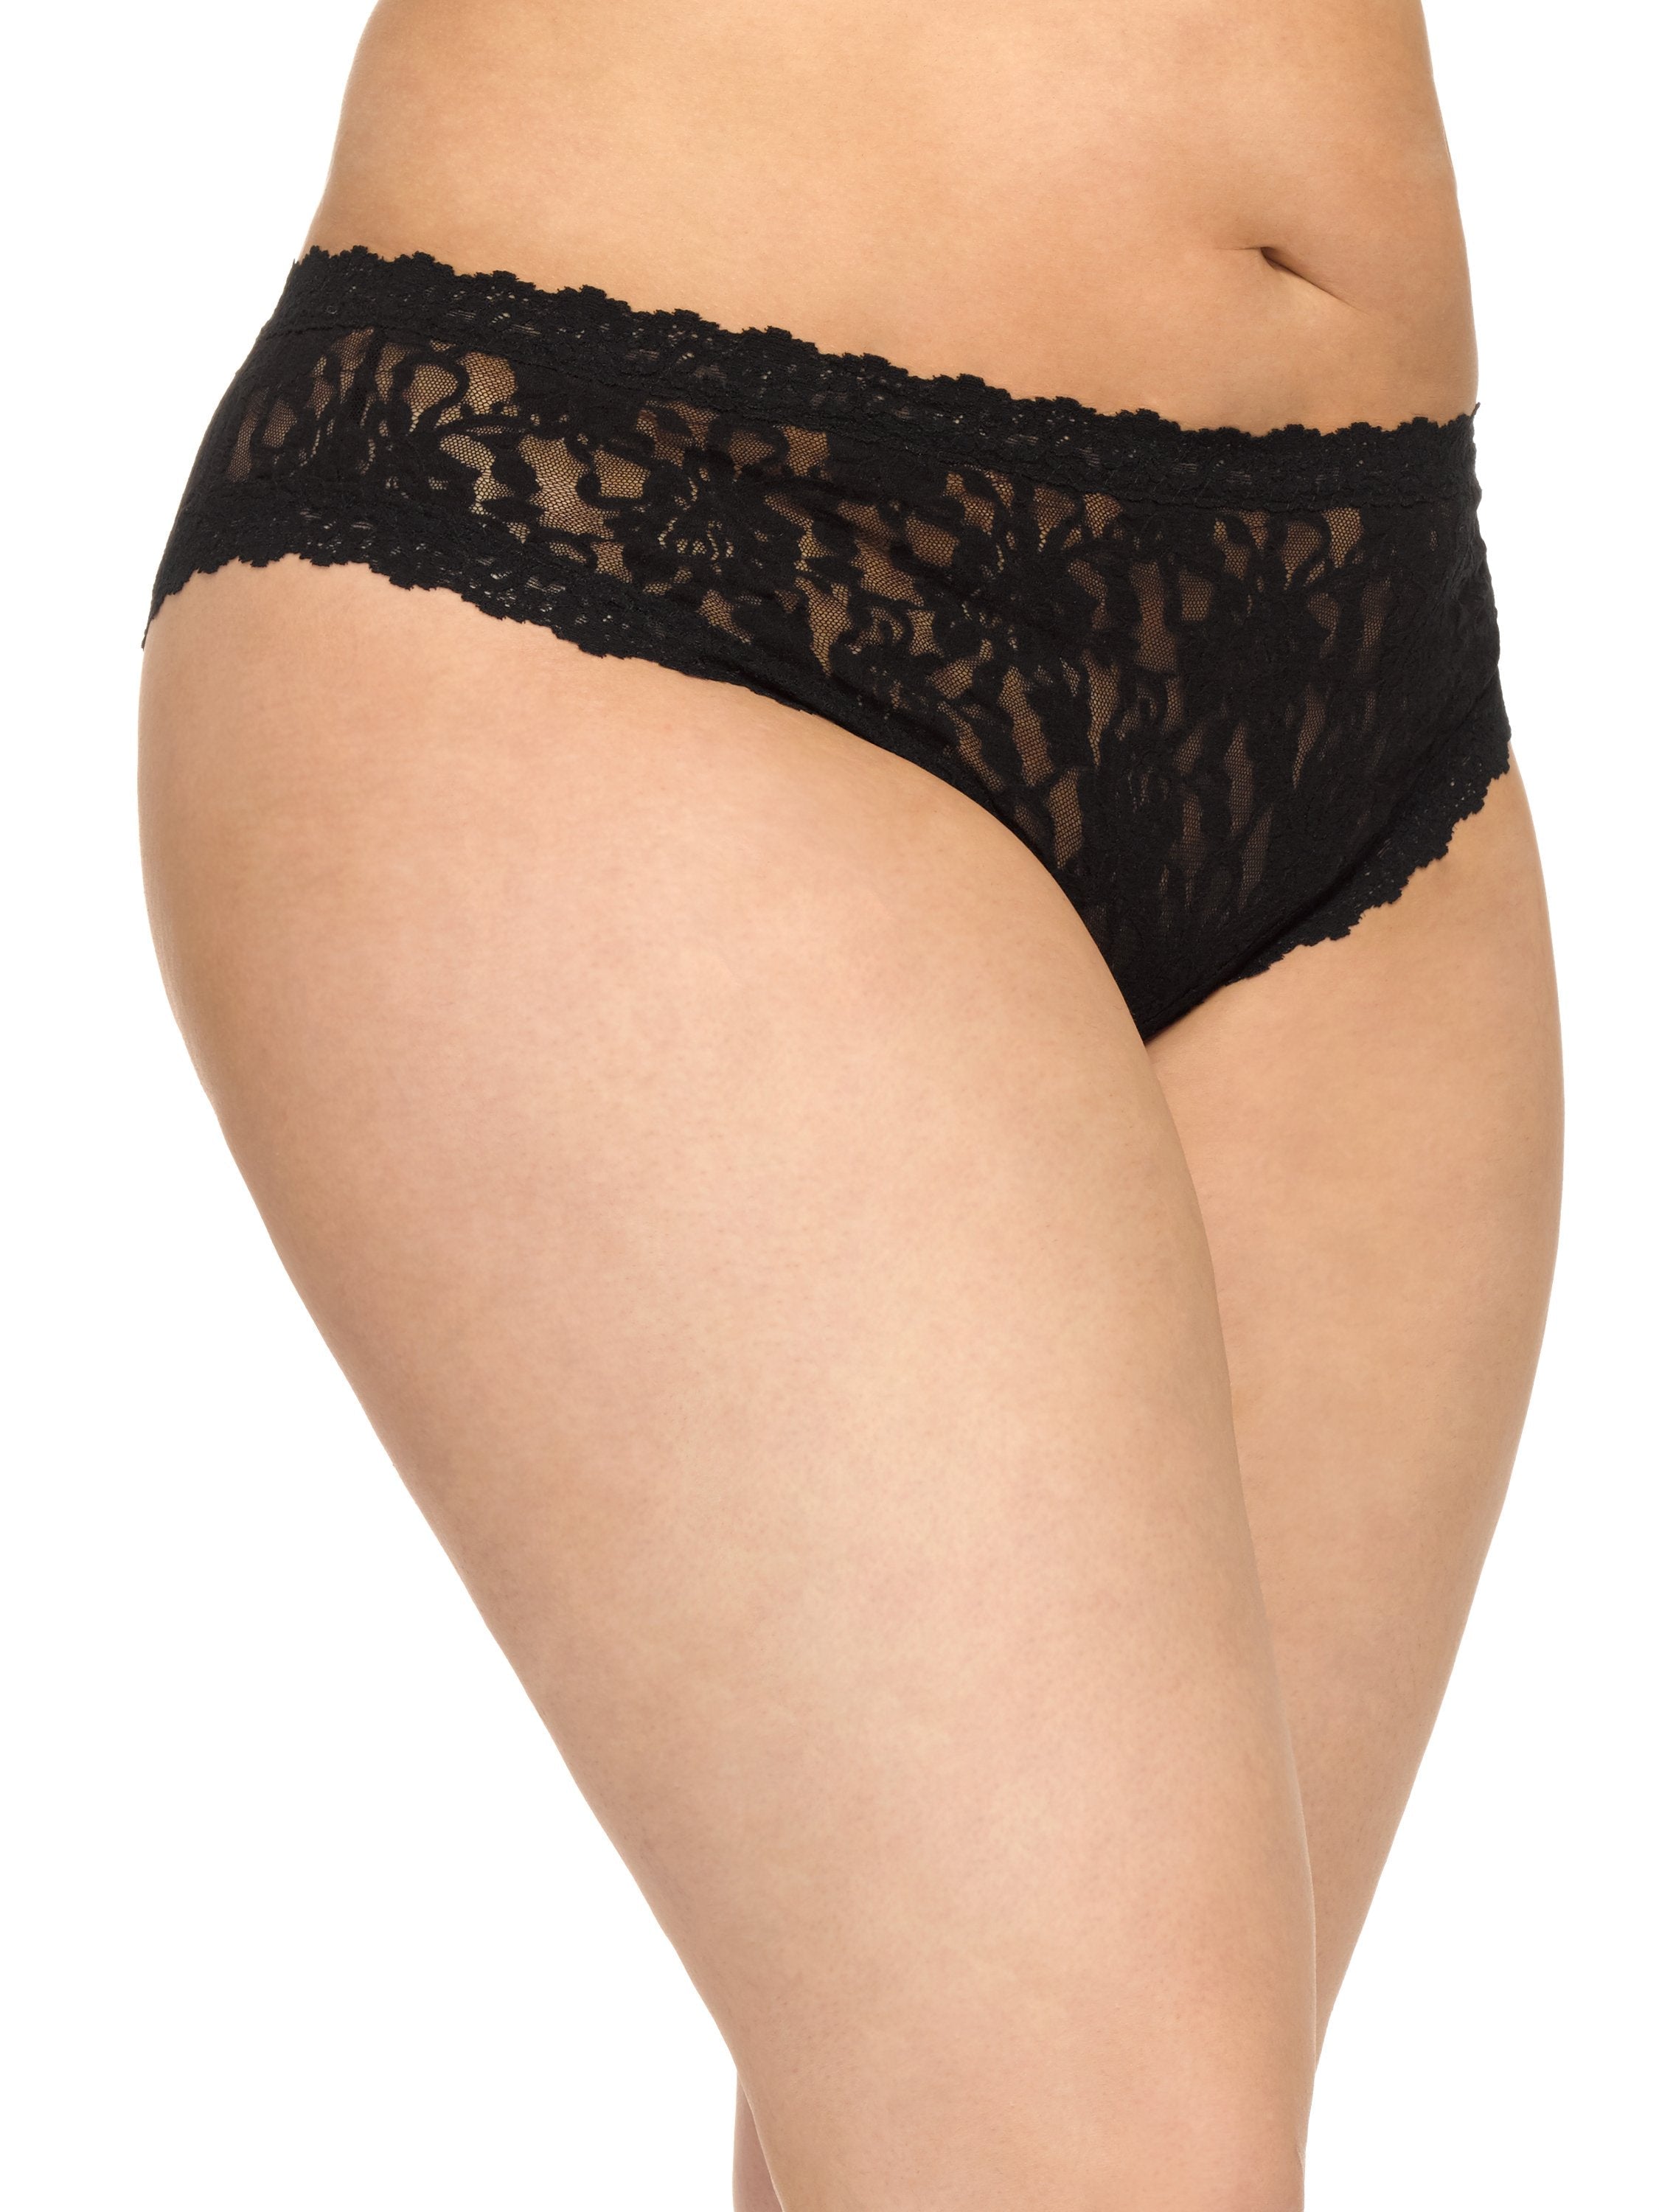 Cotton High-Rise Cheeky Lace Trim Panty  High waisted panties, High waisted,  Plus size outfits with sneakers